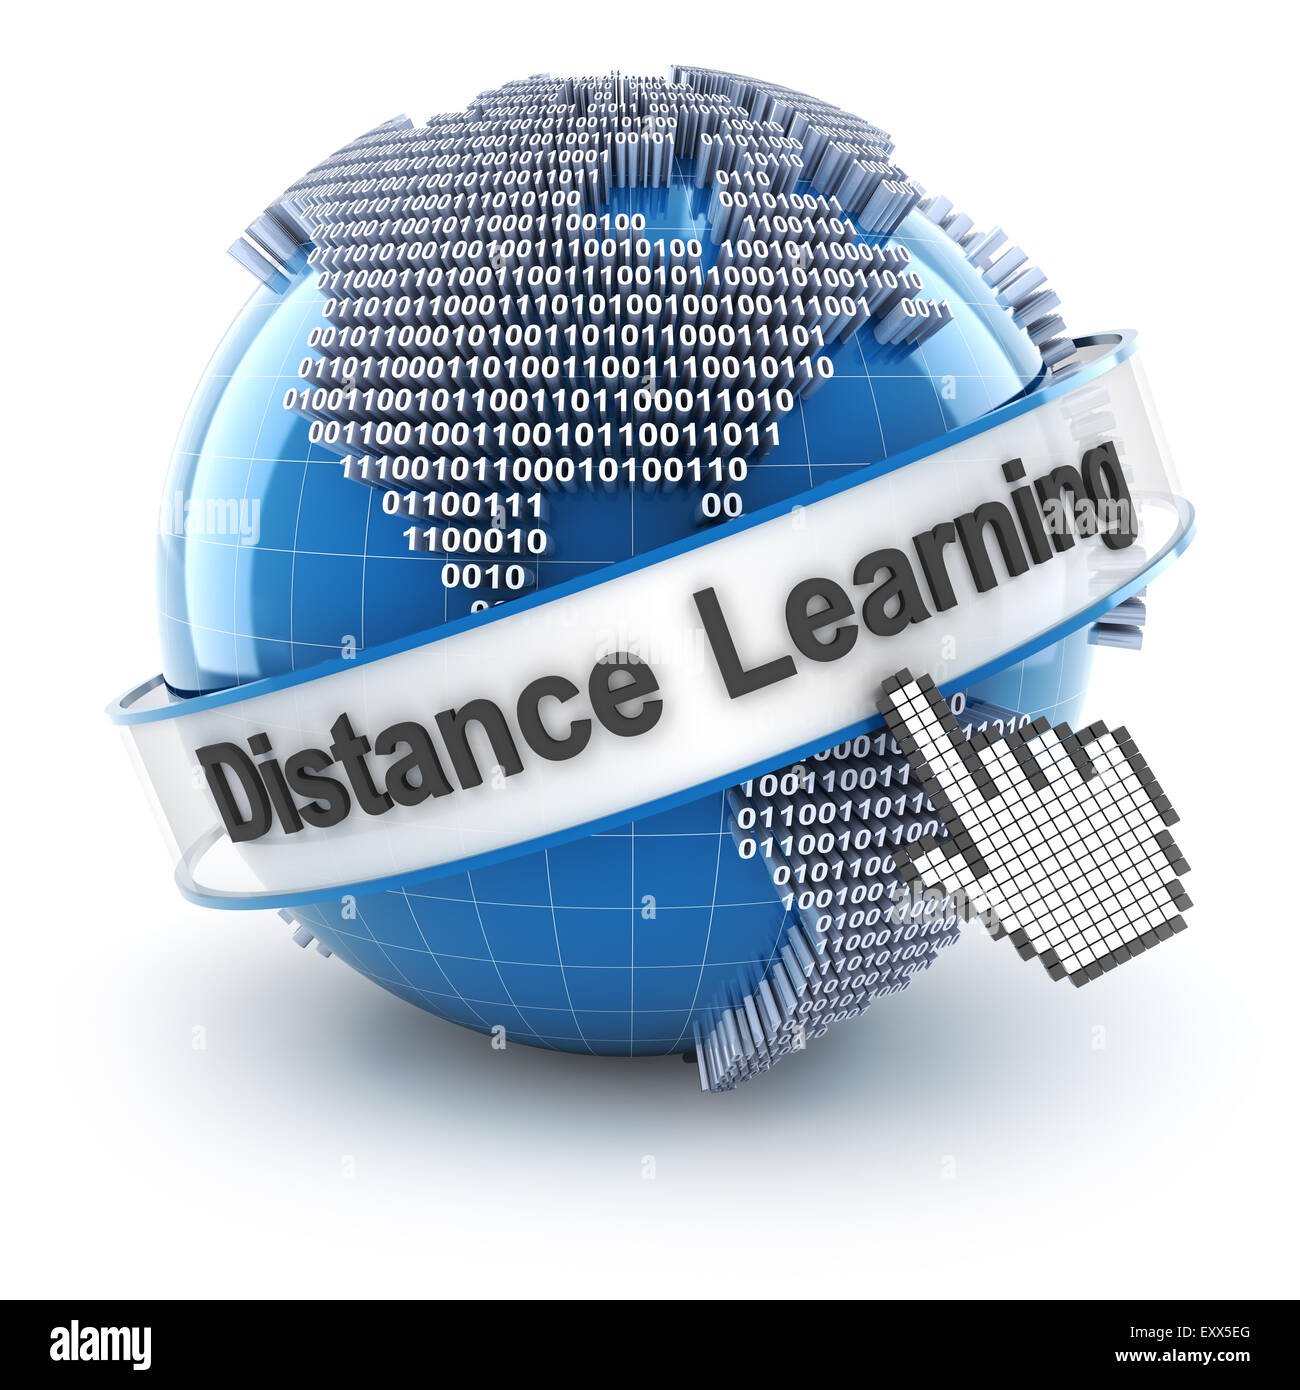 Distance learning Stock Photo